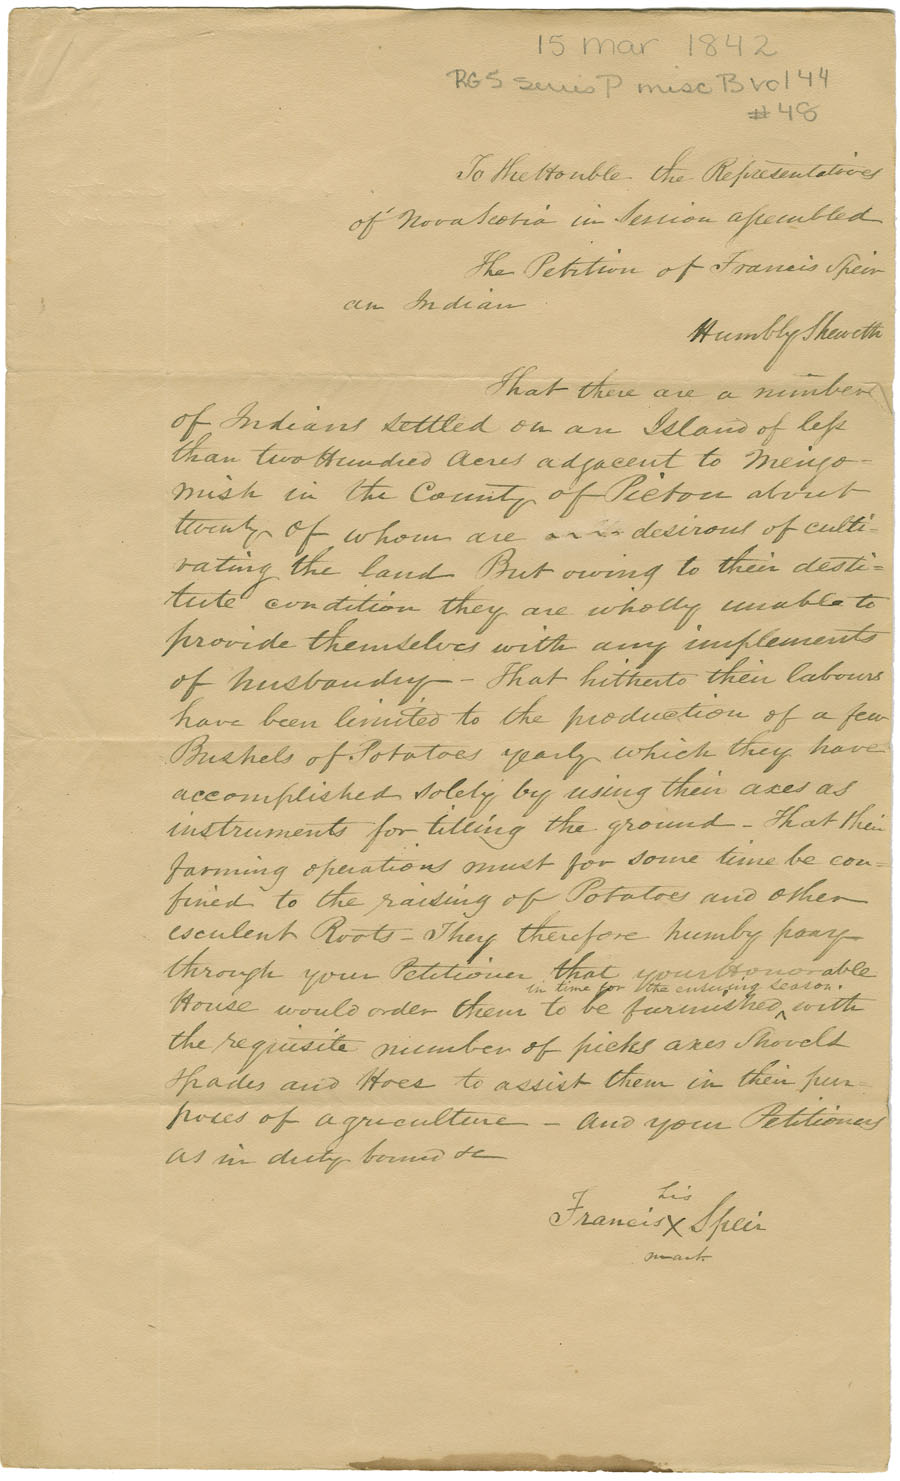 Petition of Francis Speir, a Mi'kmaq from Merigomish, Pictou County, asking for agricultural implements for the Mi'kmaq.